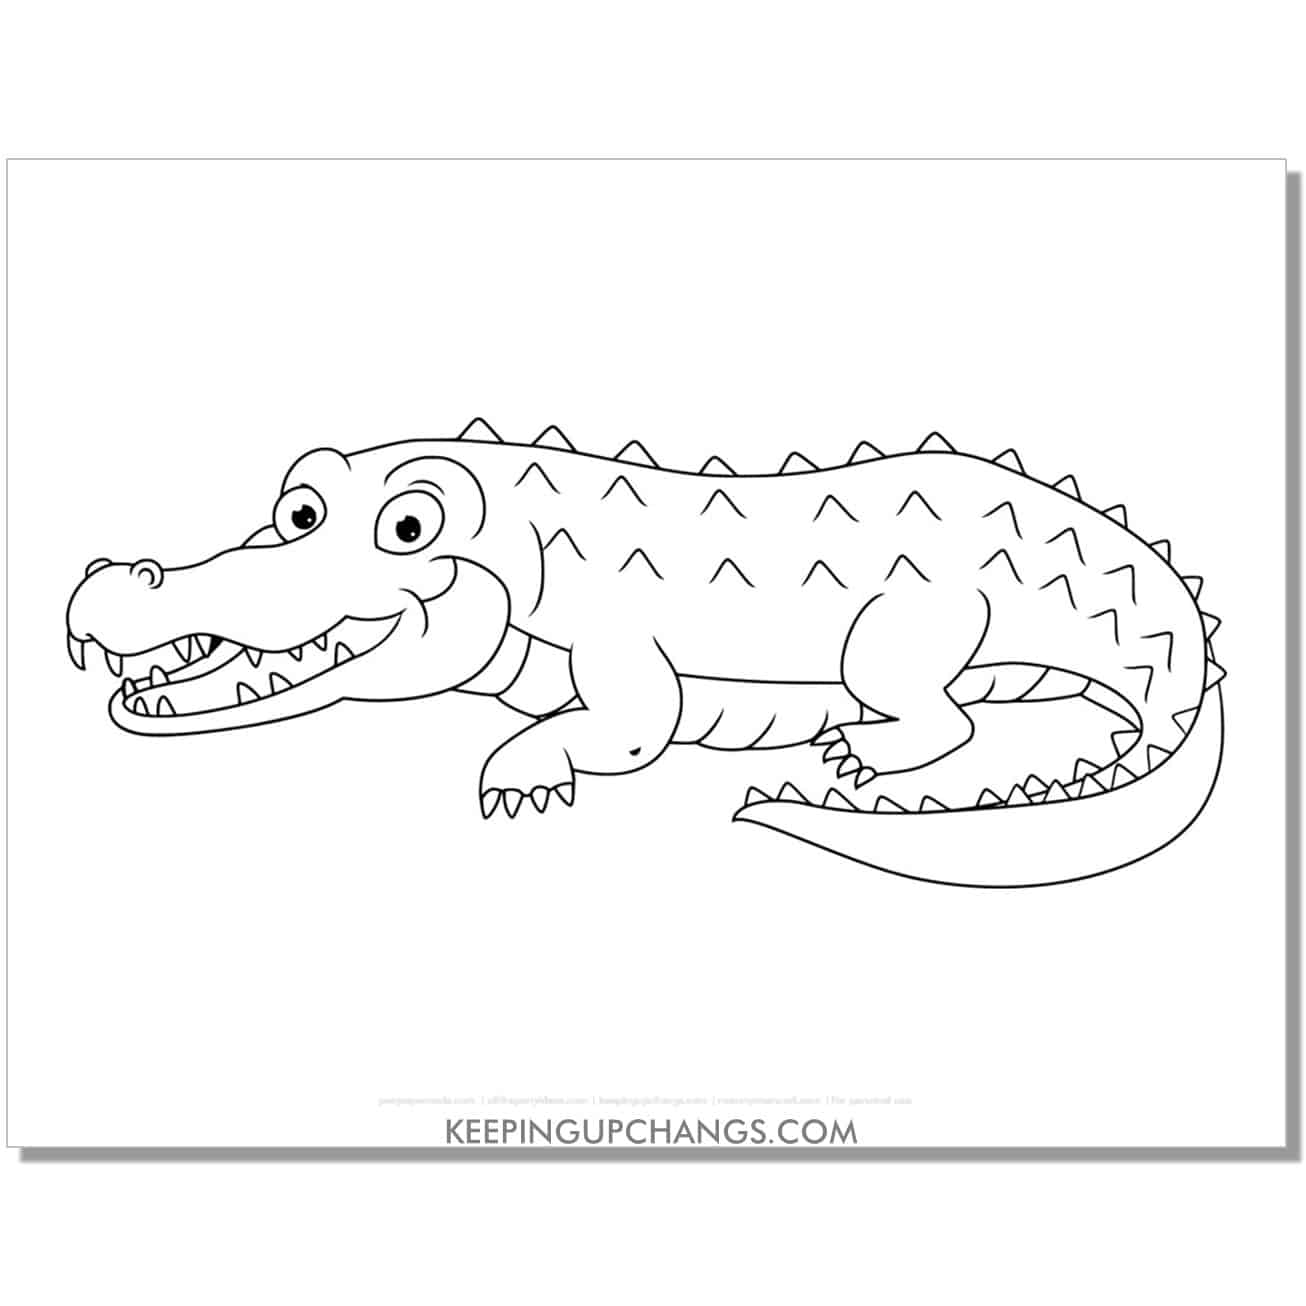 free alligator, crocodile with big eyes coloring page, sheet.